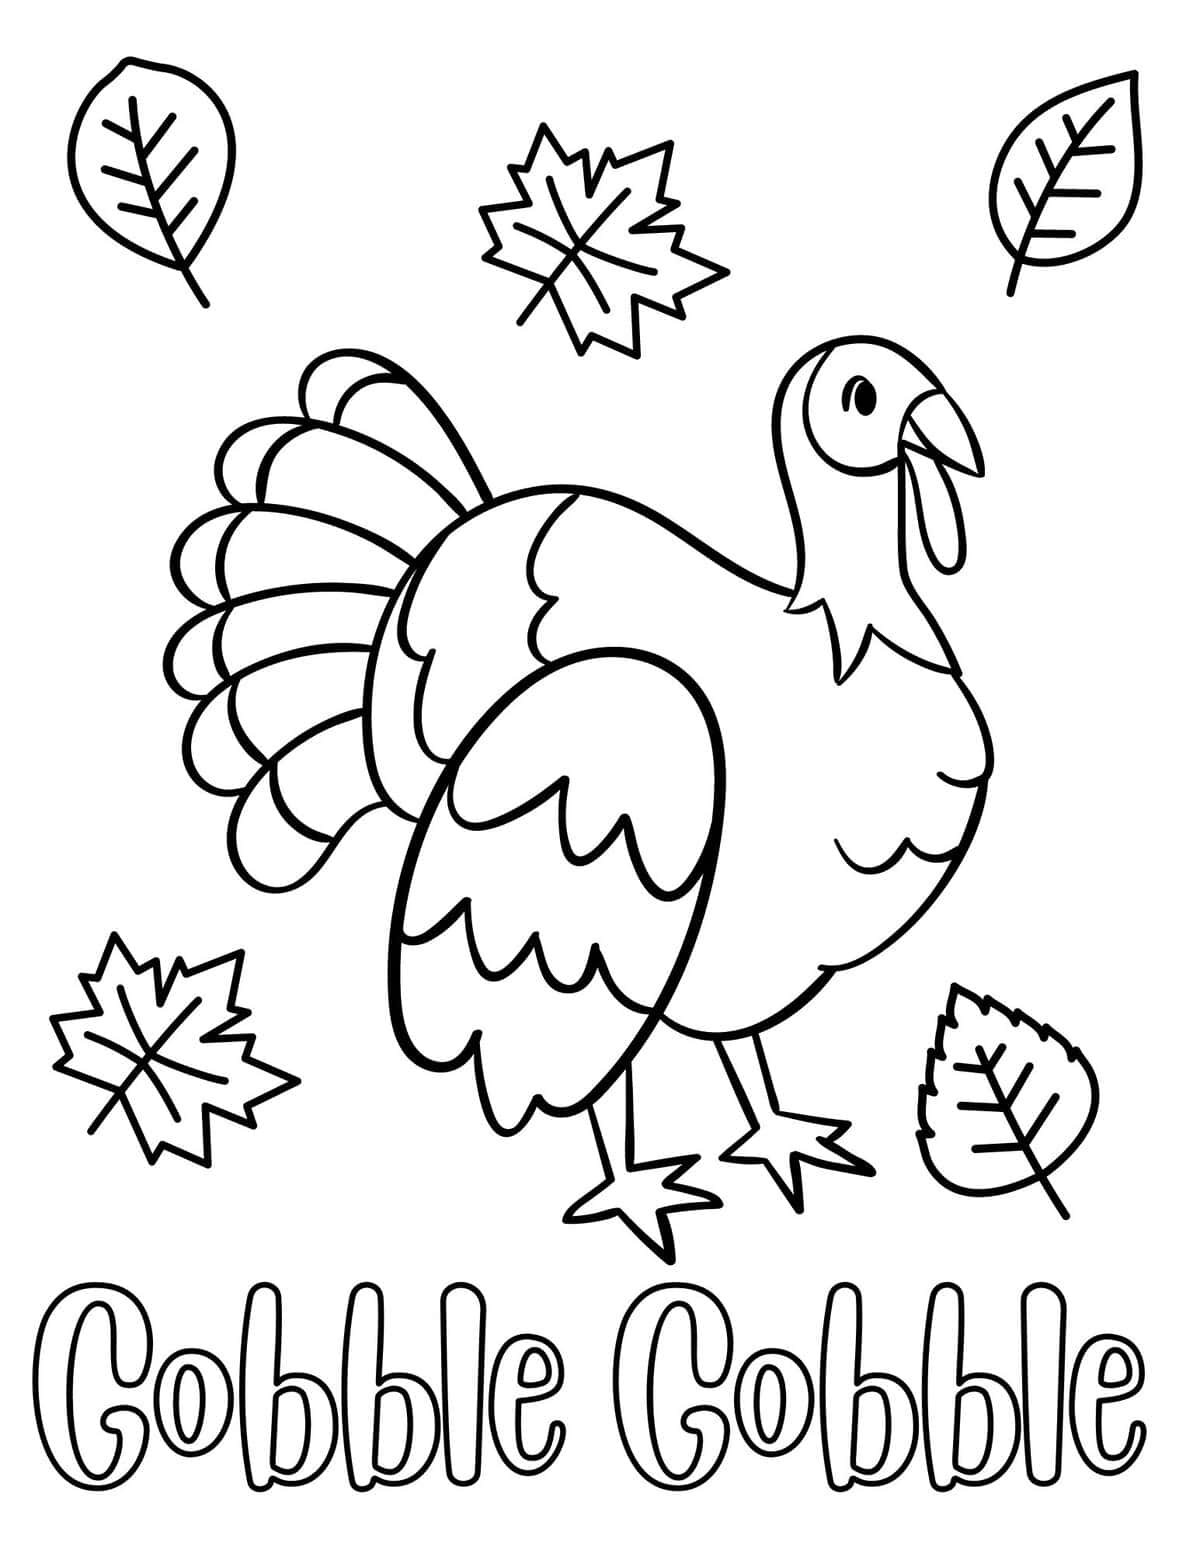 Free thanksgiving turkey coloring pages for kids